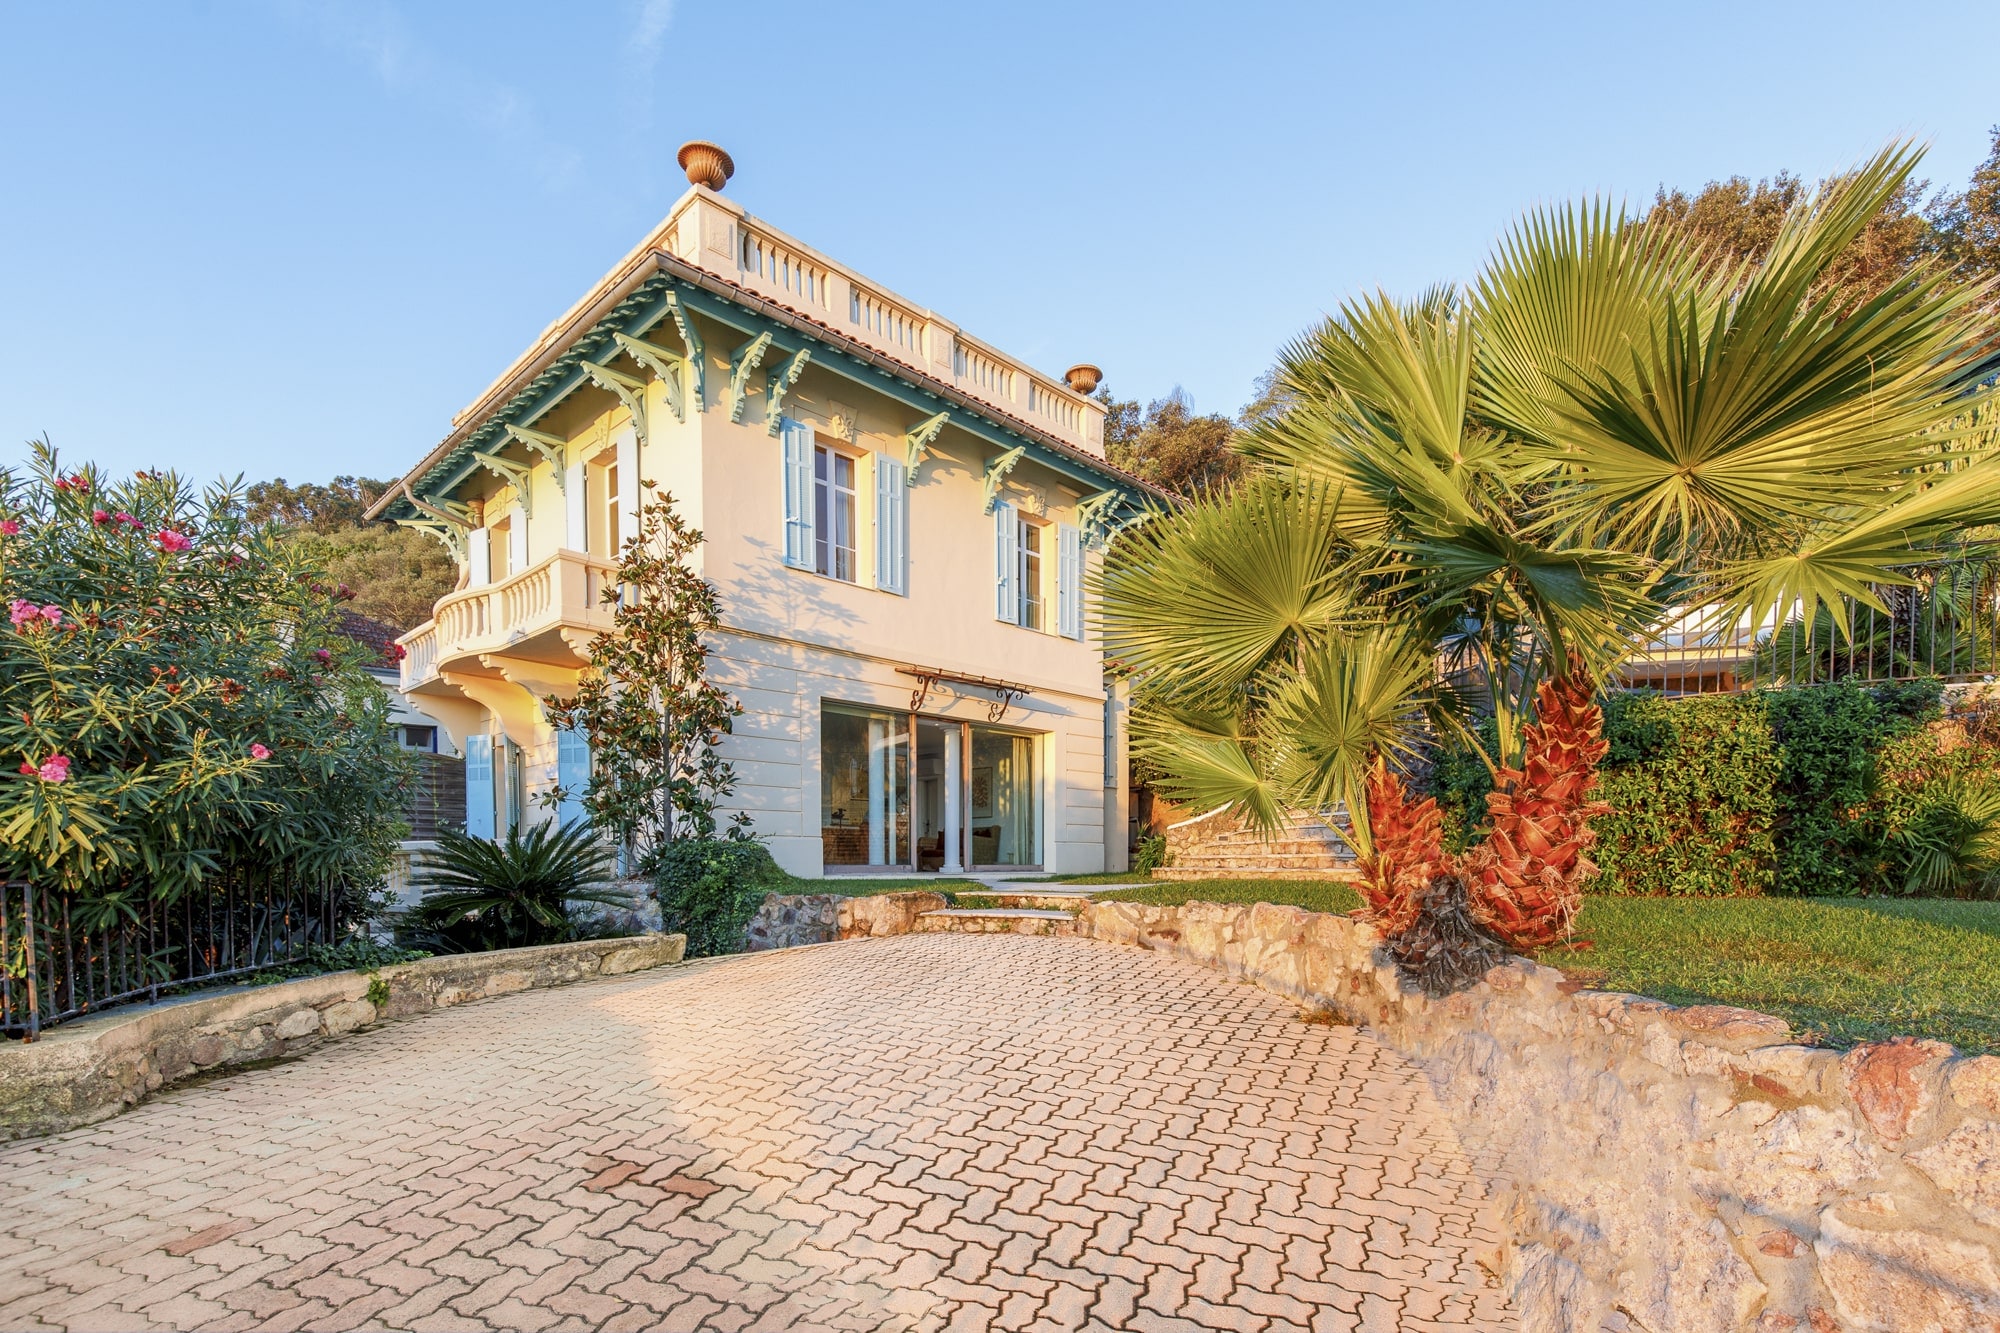 Property Image 2 - Magnificent villa with sea view in Théoule sur mer - by feelluxuryholidays